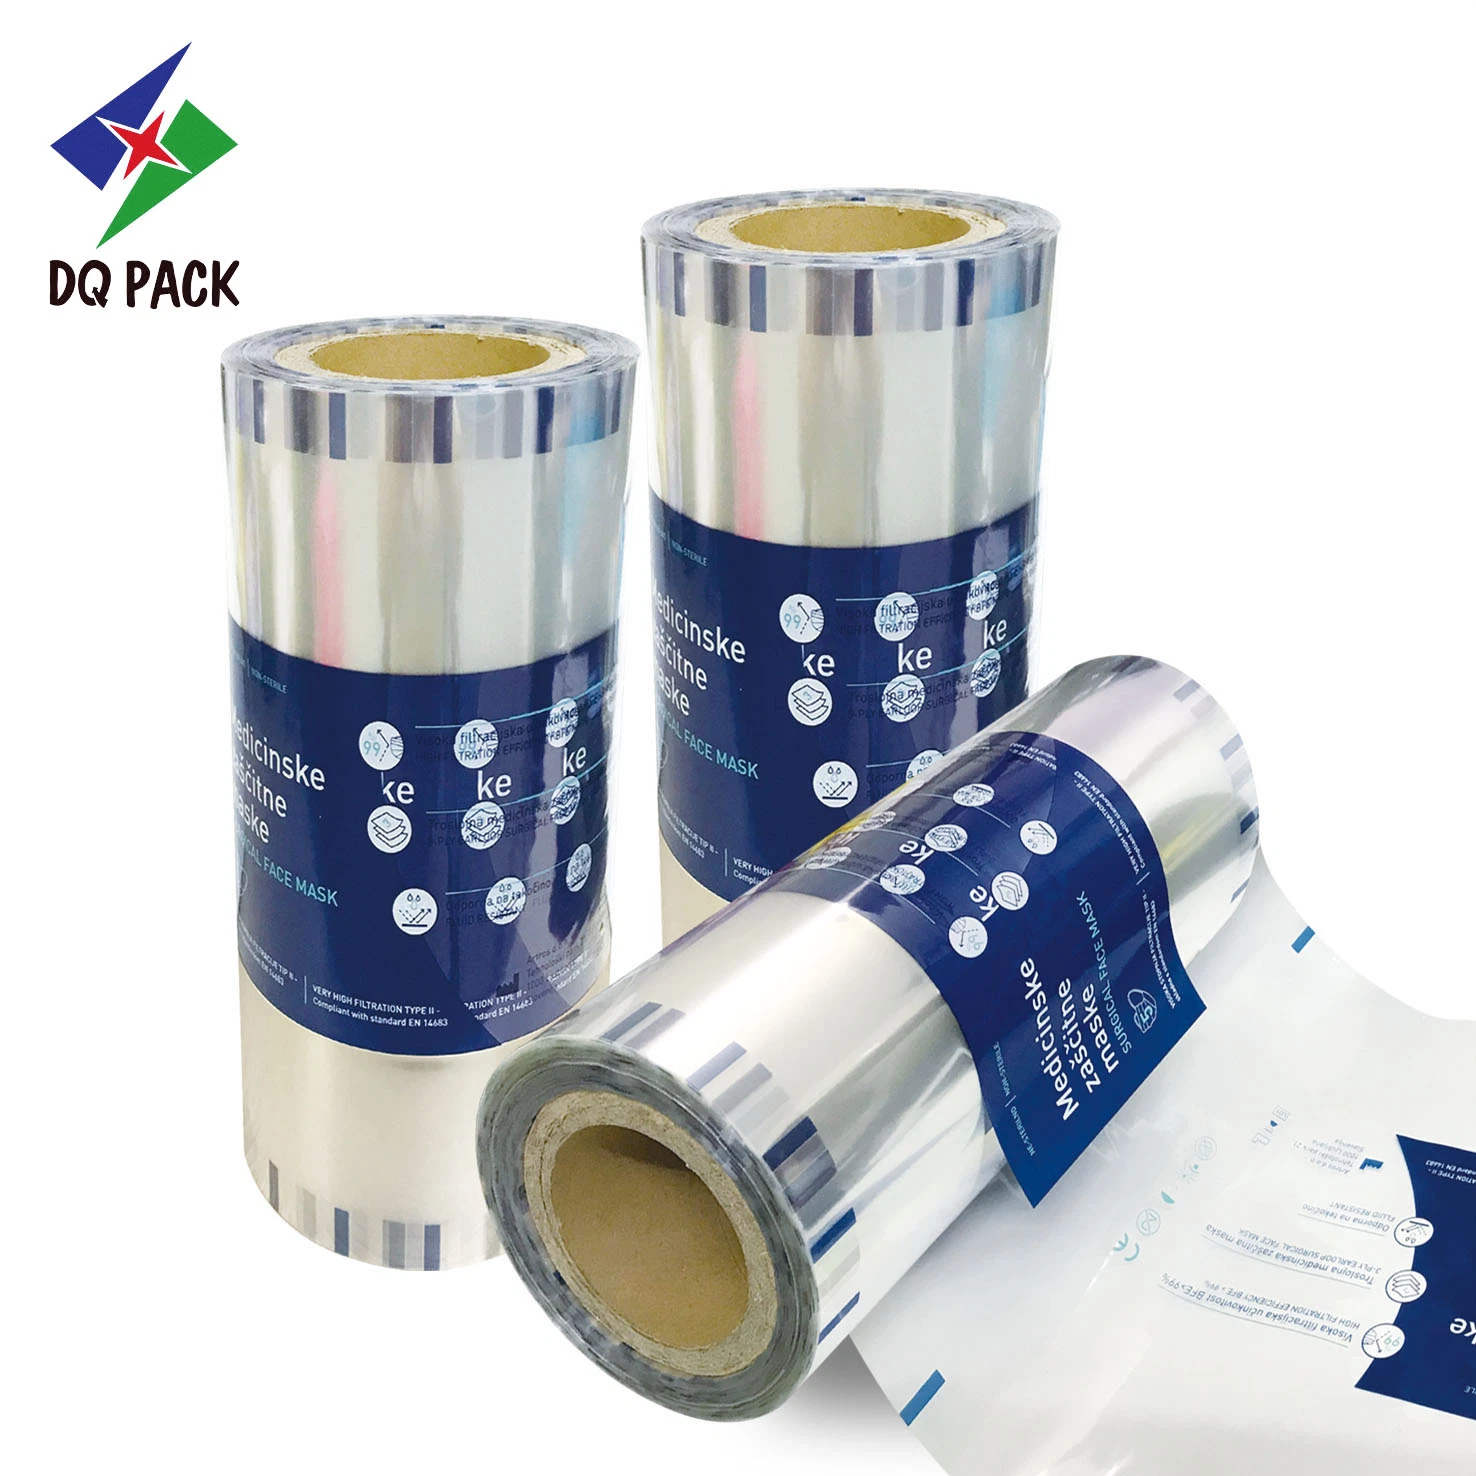 Dq Pack Bubble Tea Cup Sealing Film Plastic Packaging Plastic Roll Film